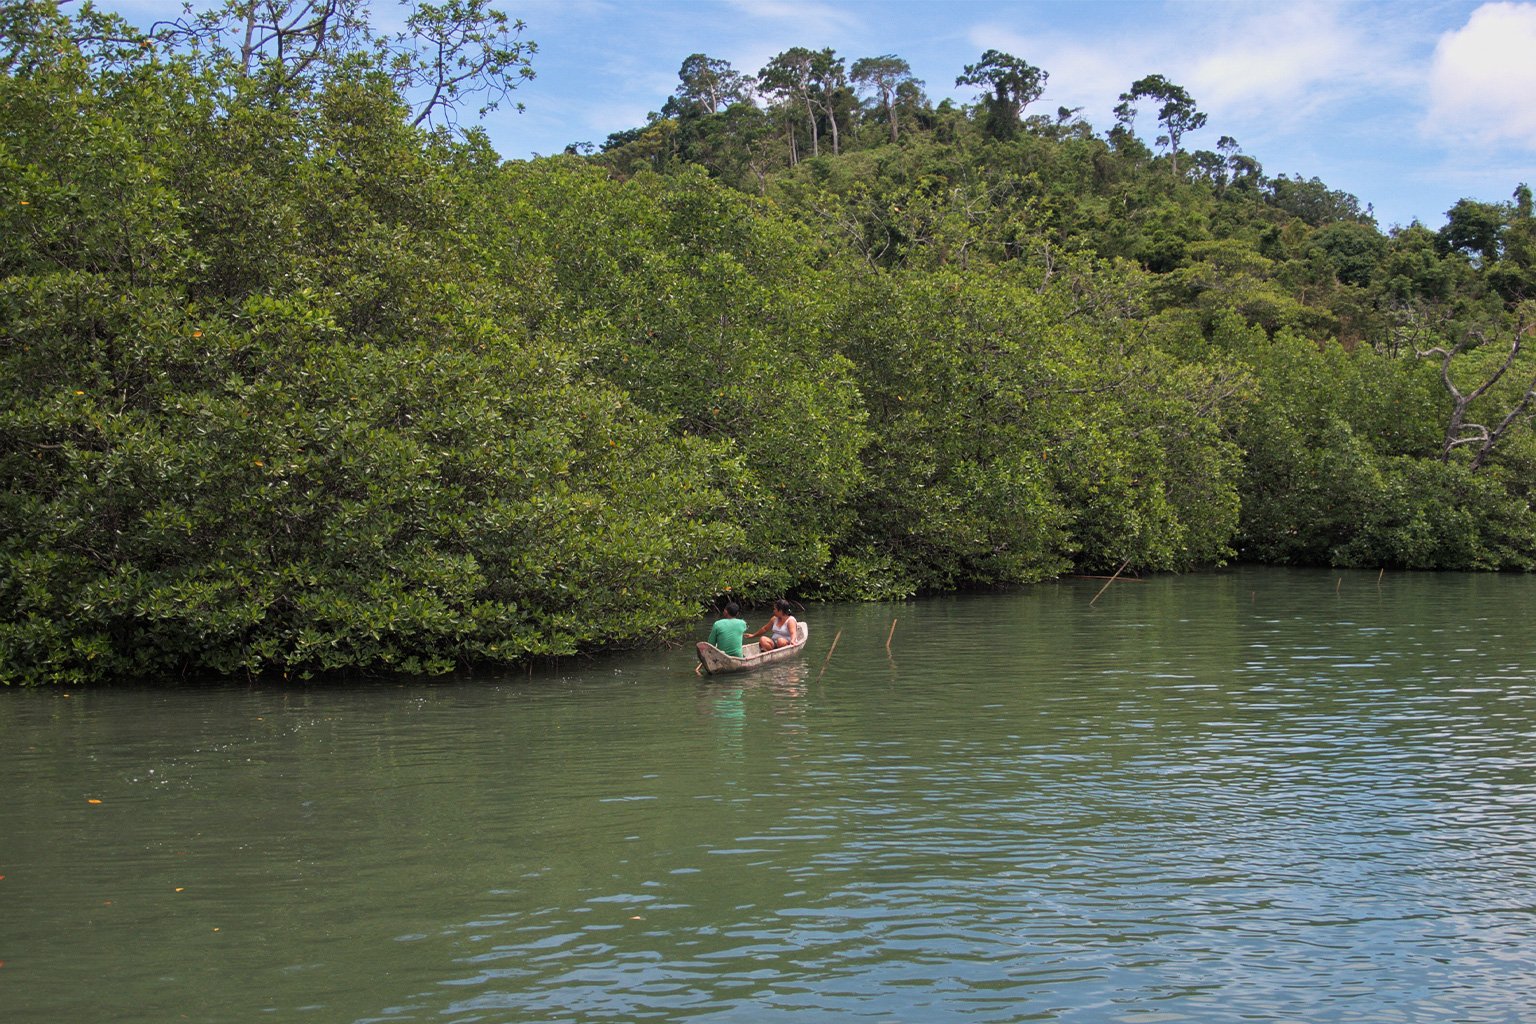 The fishing community recognizes that their bountiful catches are tied to the thick mangroves blanketing the Malampaya Sound coast. Image by Rex Remo for Mongabay.